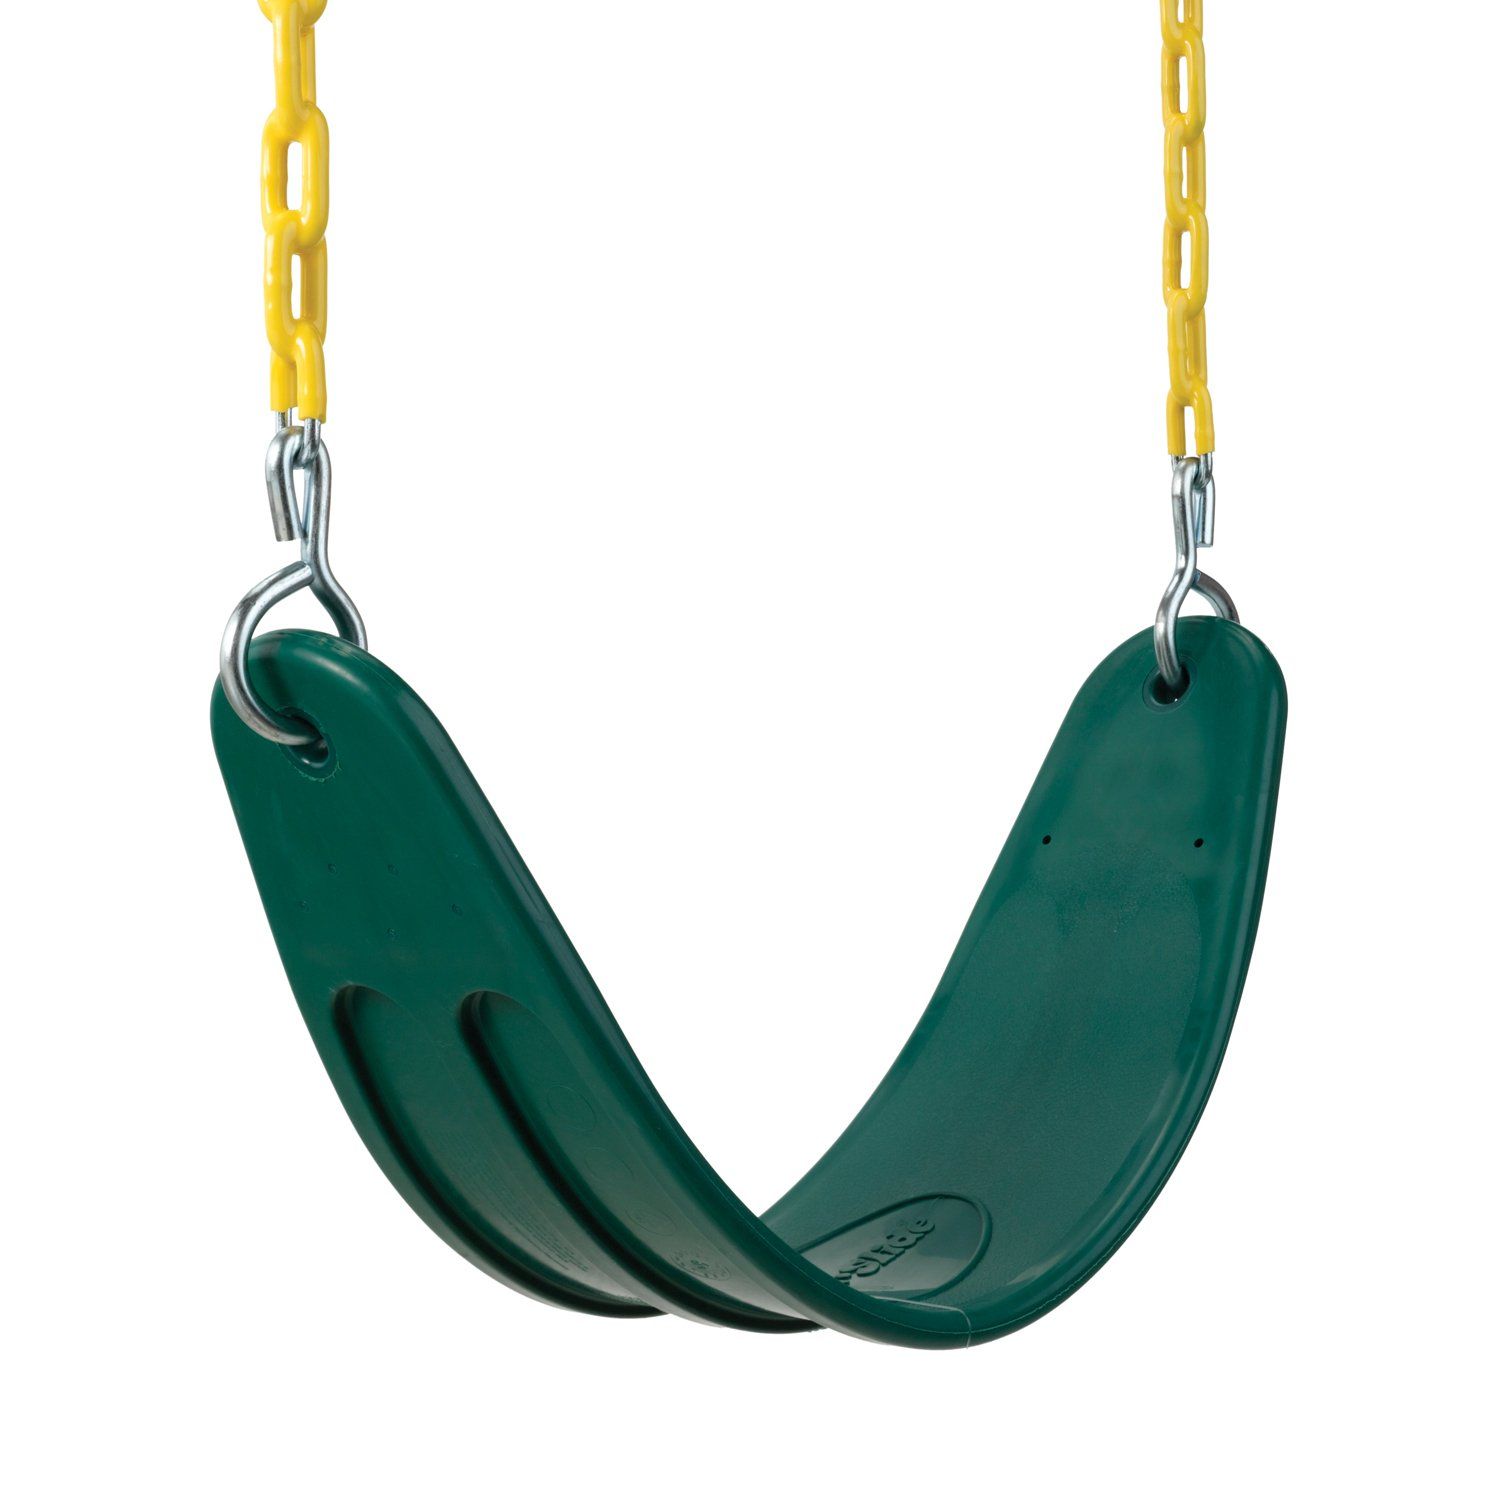 Outdoor Toys & Activities Set Of 2 Strong Chrome Dipped Throughout Swing Seats With Chains (View 3 of 25)